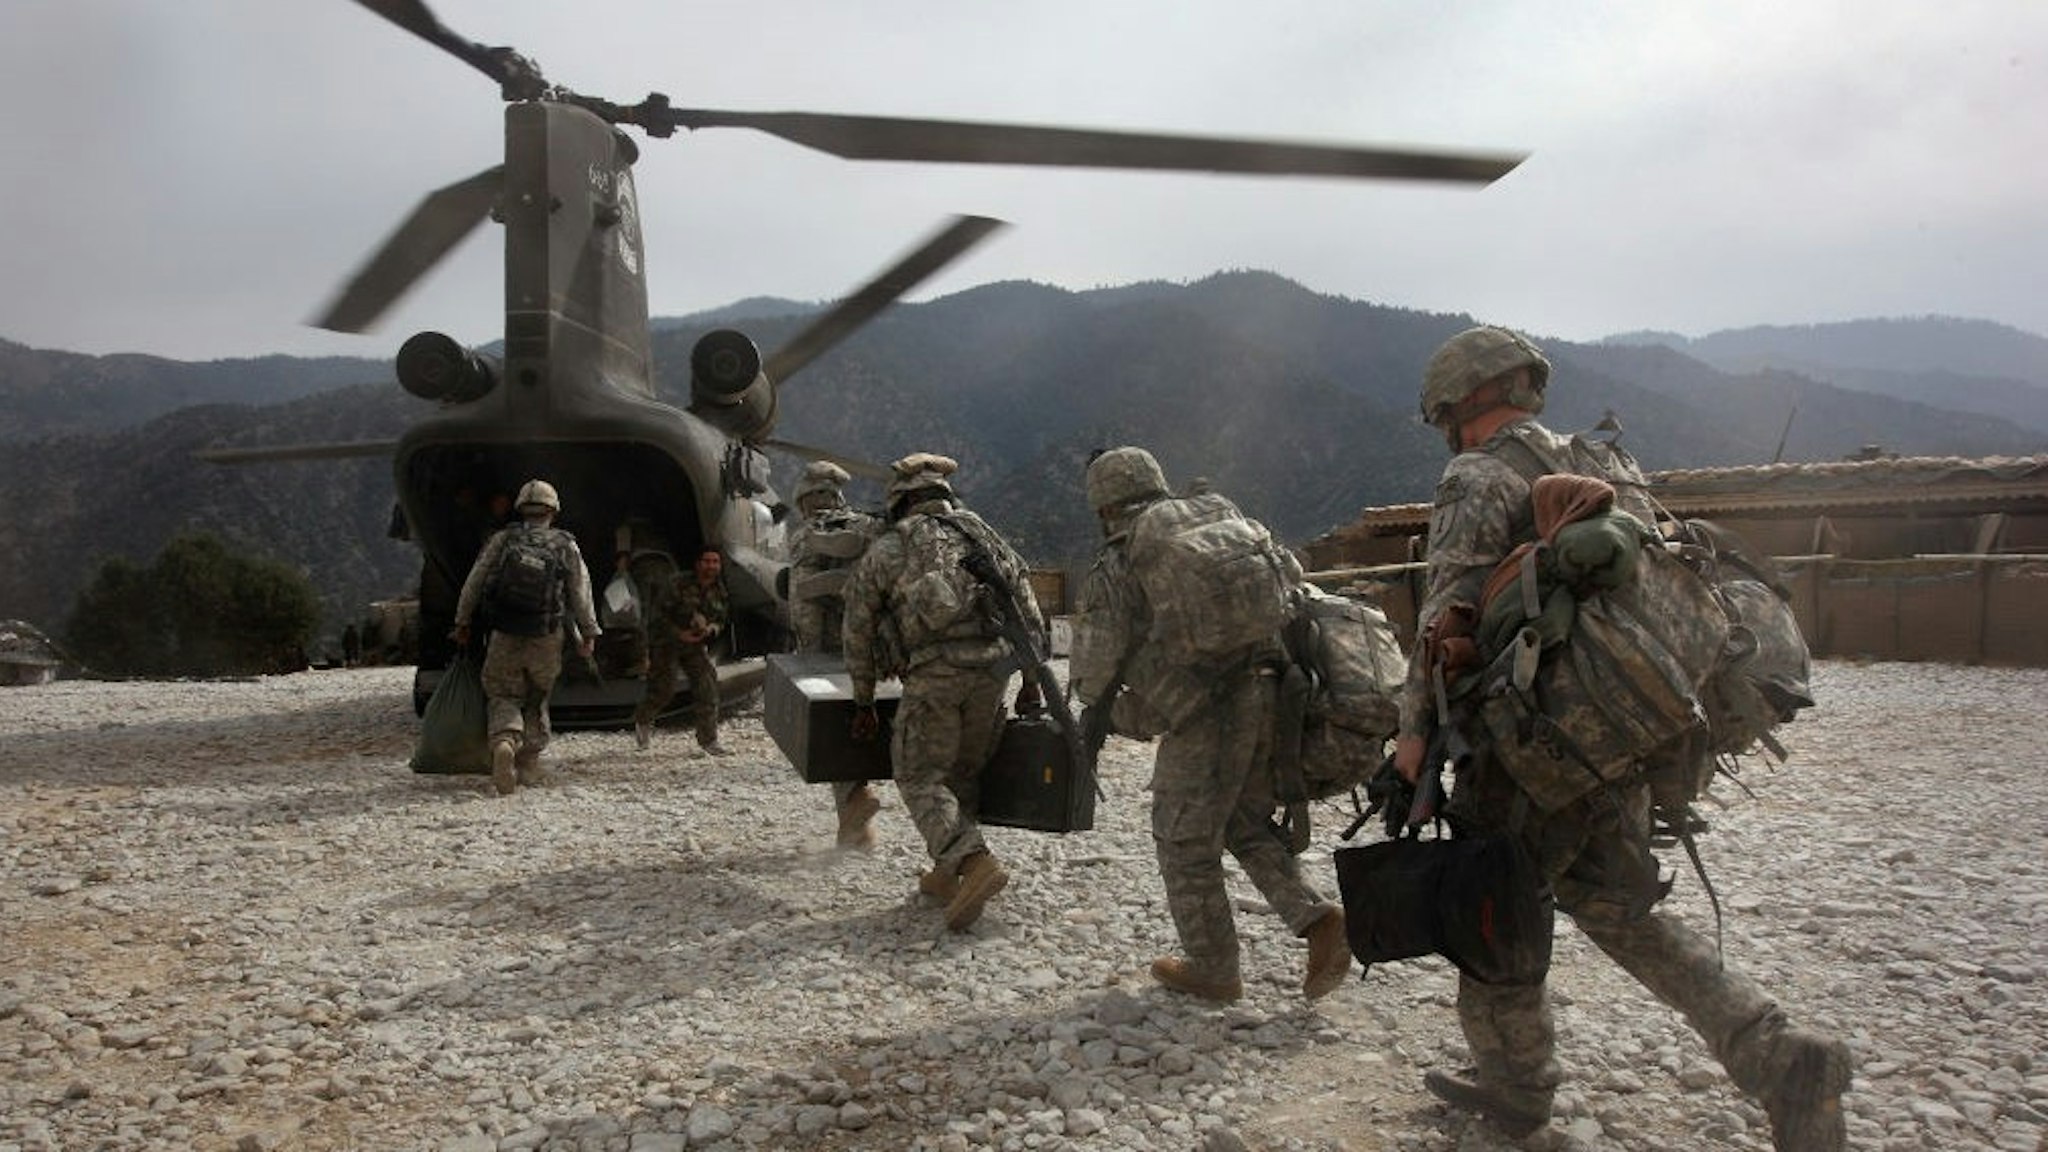 KORENGAL VALLEY, AFGHANISTAN - OCTOBER 27: U.S. soldiers board an Army Chinook transport helicopter after it brought fresh soldiers and supplies to the Korengal Outpost on October 27, 2008 in the Korengal Valley, Afghanistan. The military spends huge effort and money to fly in supplies to soldiers of the 1-26 Infantry based in the Korengal Valley, site of some of the fiercest fighting of the Afghan war. The unpaved road into the remote area is bad and will become more treacherous with the onset of winter. (Photo by